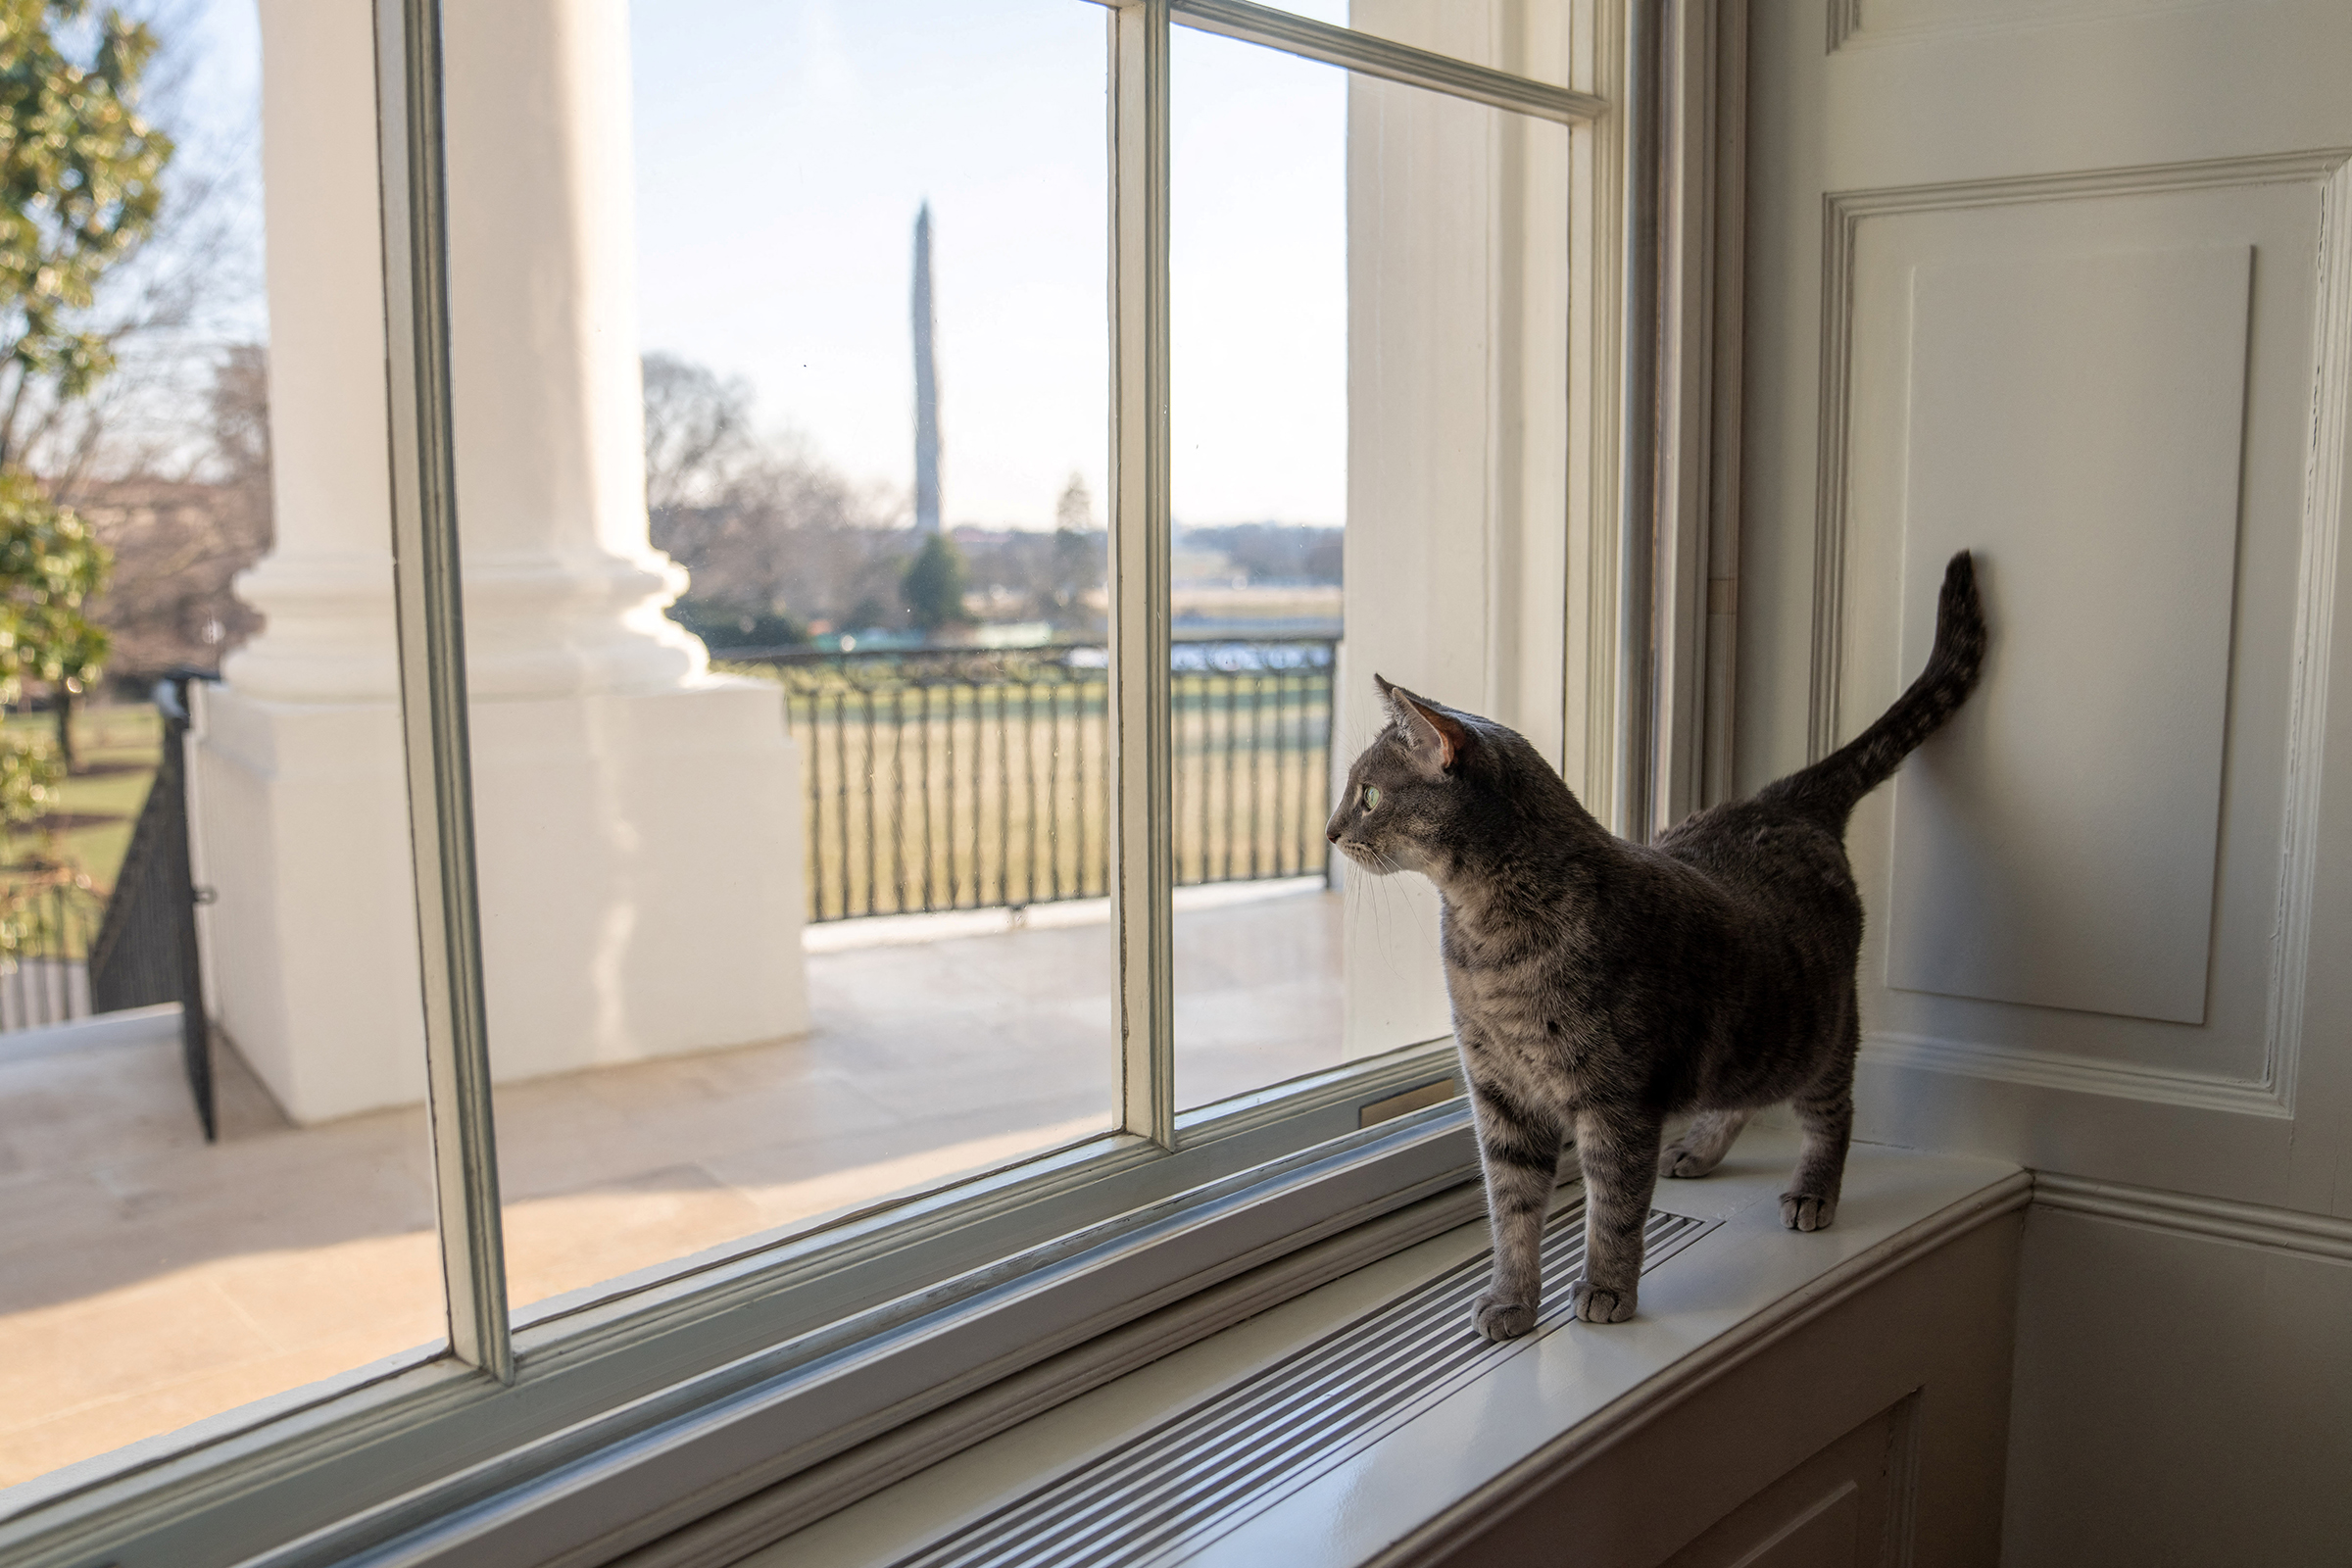 Willow, U.S. President Joe Biden and first lady Jill Biden’s new pet cat, is seen in a White House handout photo as she looks out a window of the White House towards the Truman Balcony, the South Lawn and the Washington Monument on Jan. 27, 2022. (Erin Scott—The White House/REUTERS)